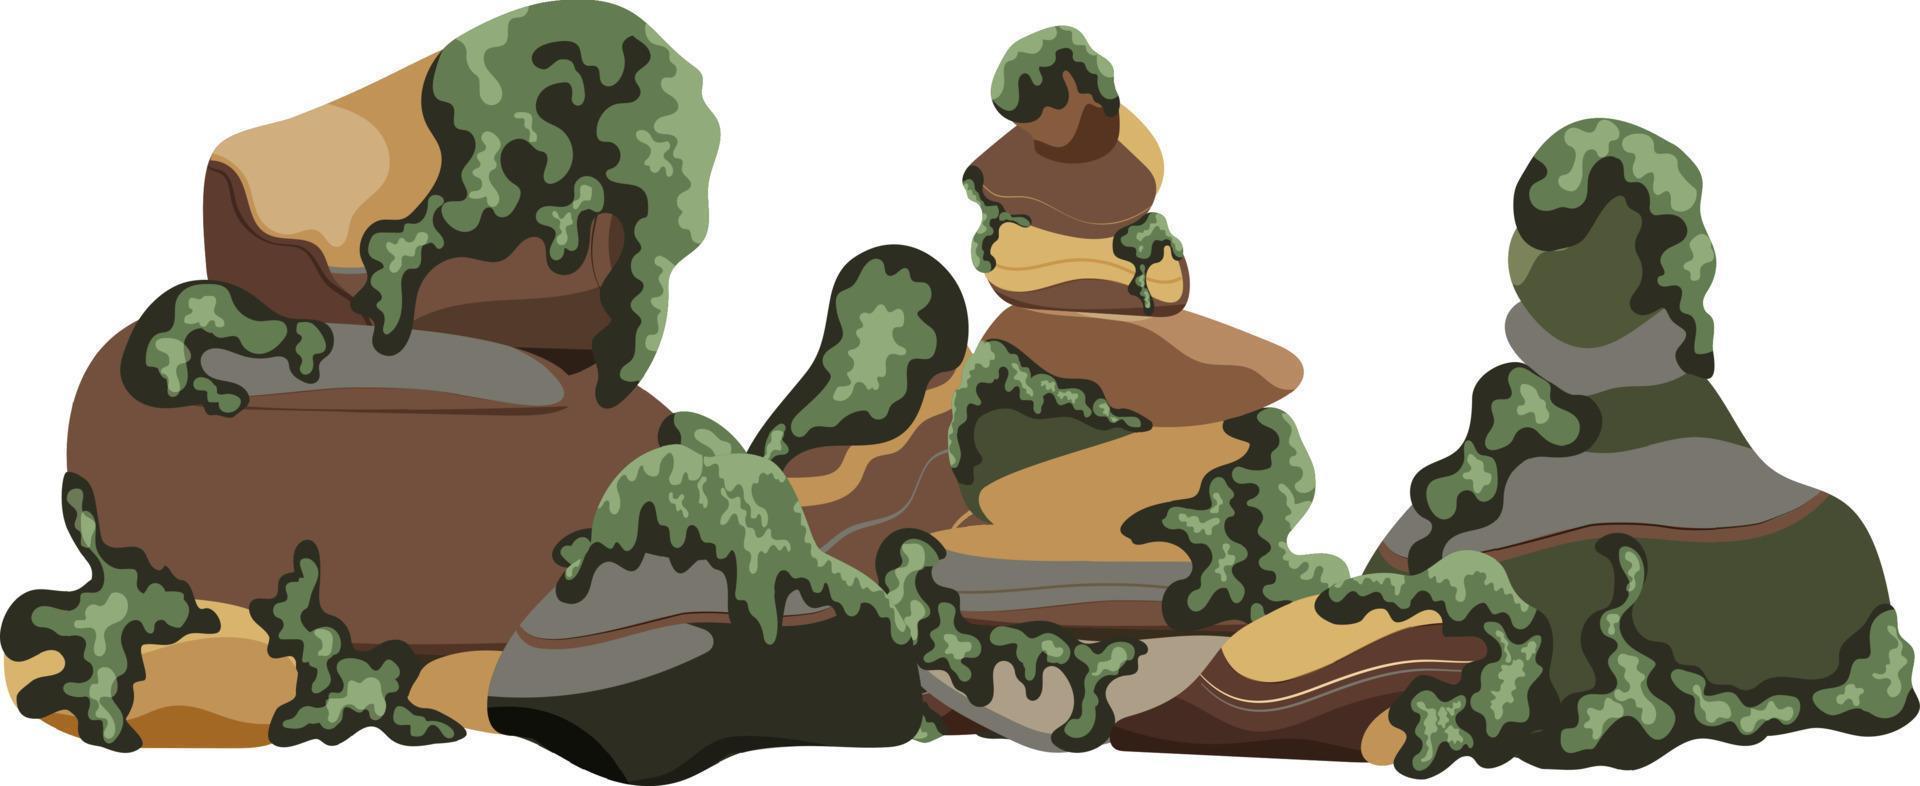 Collection of stones of various shapes and moss.Coastal pebbles,cobblestones,gravel,minerals and geological formations.Rock fragments,boulders and building material. vector